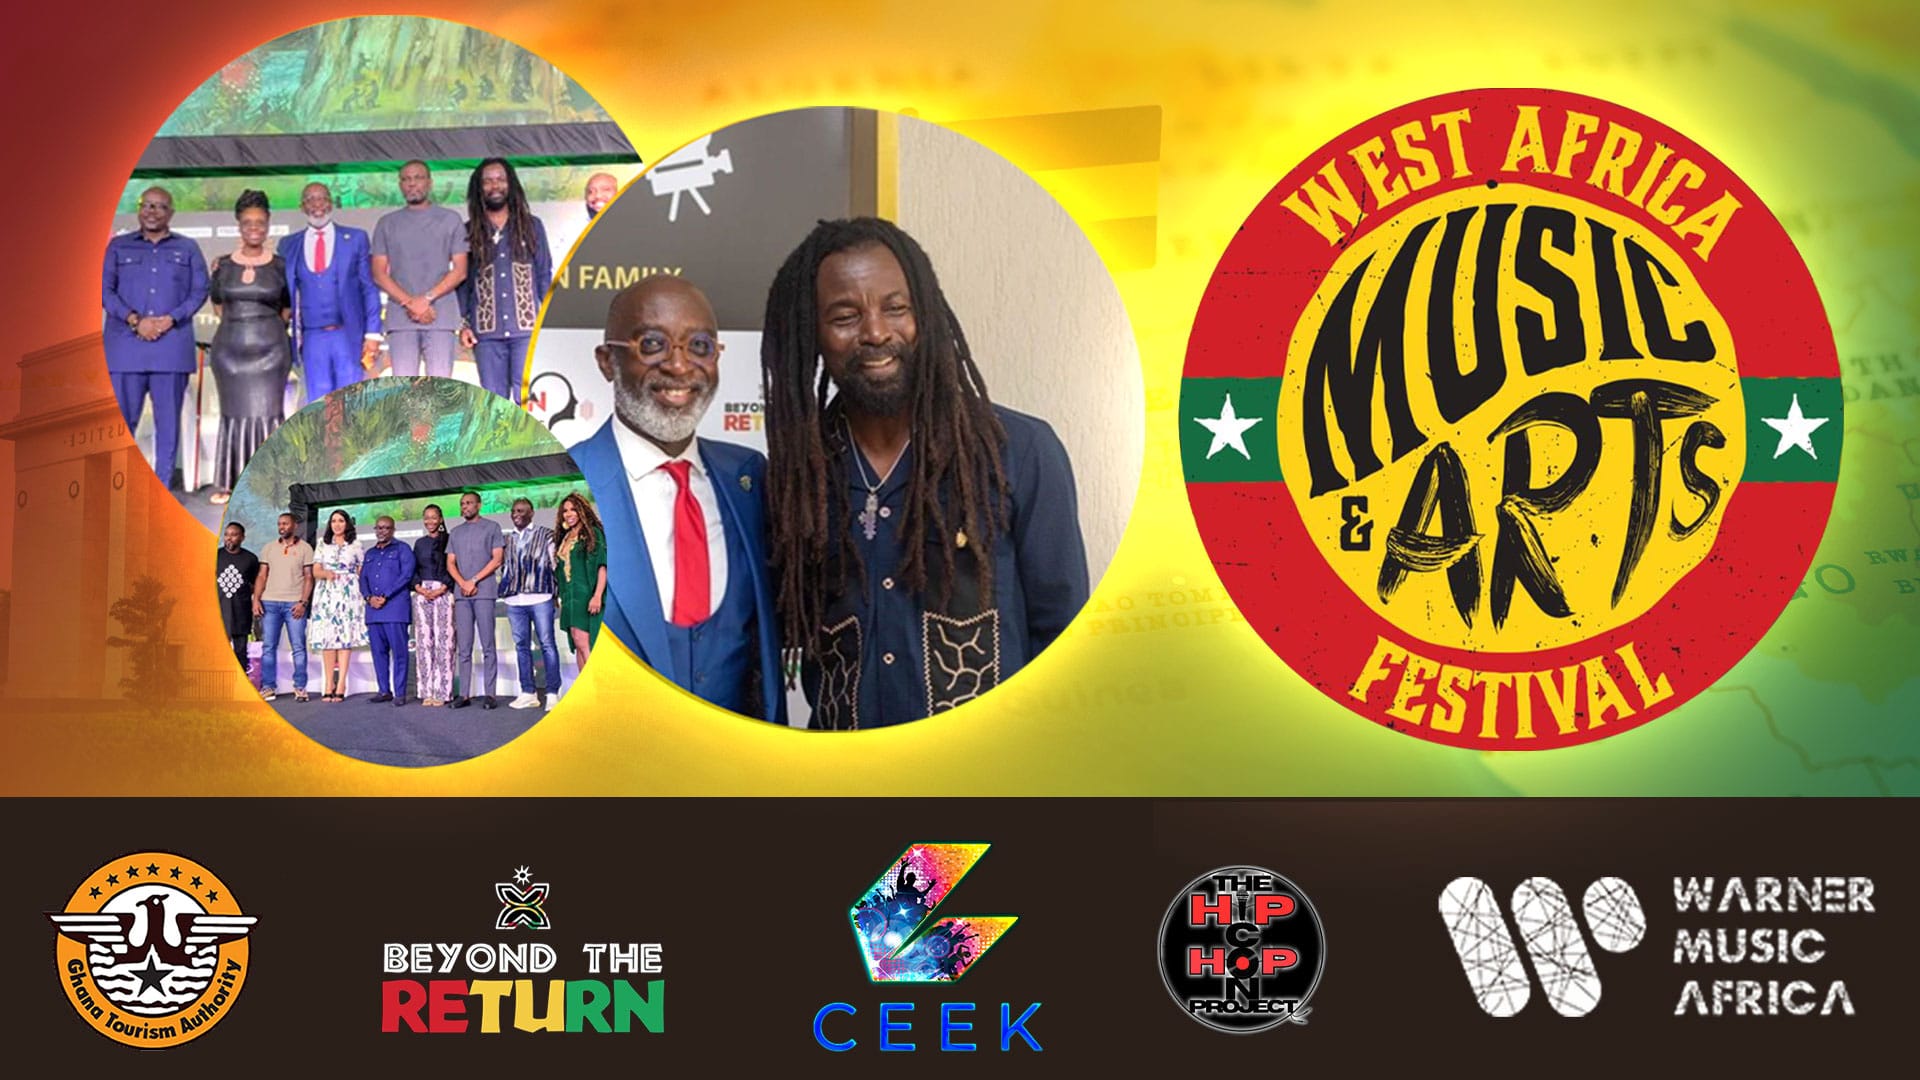 WAMA FEST West Africa Music and Arts Festival Conference  - Morning Session